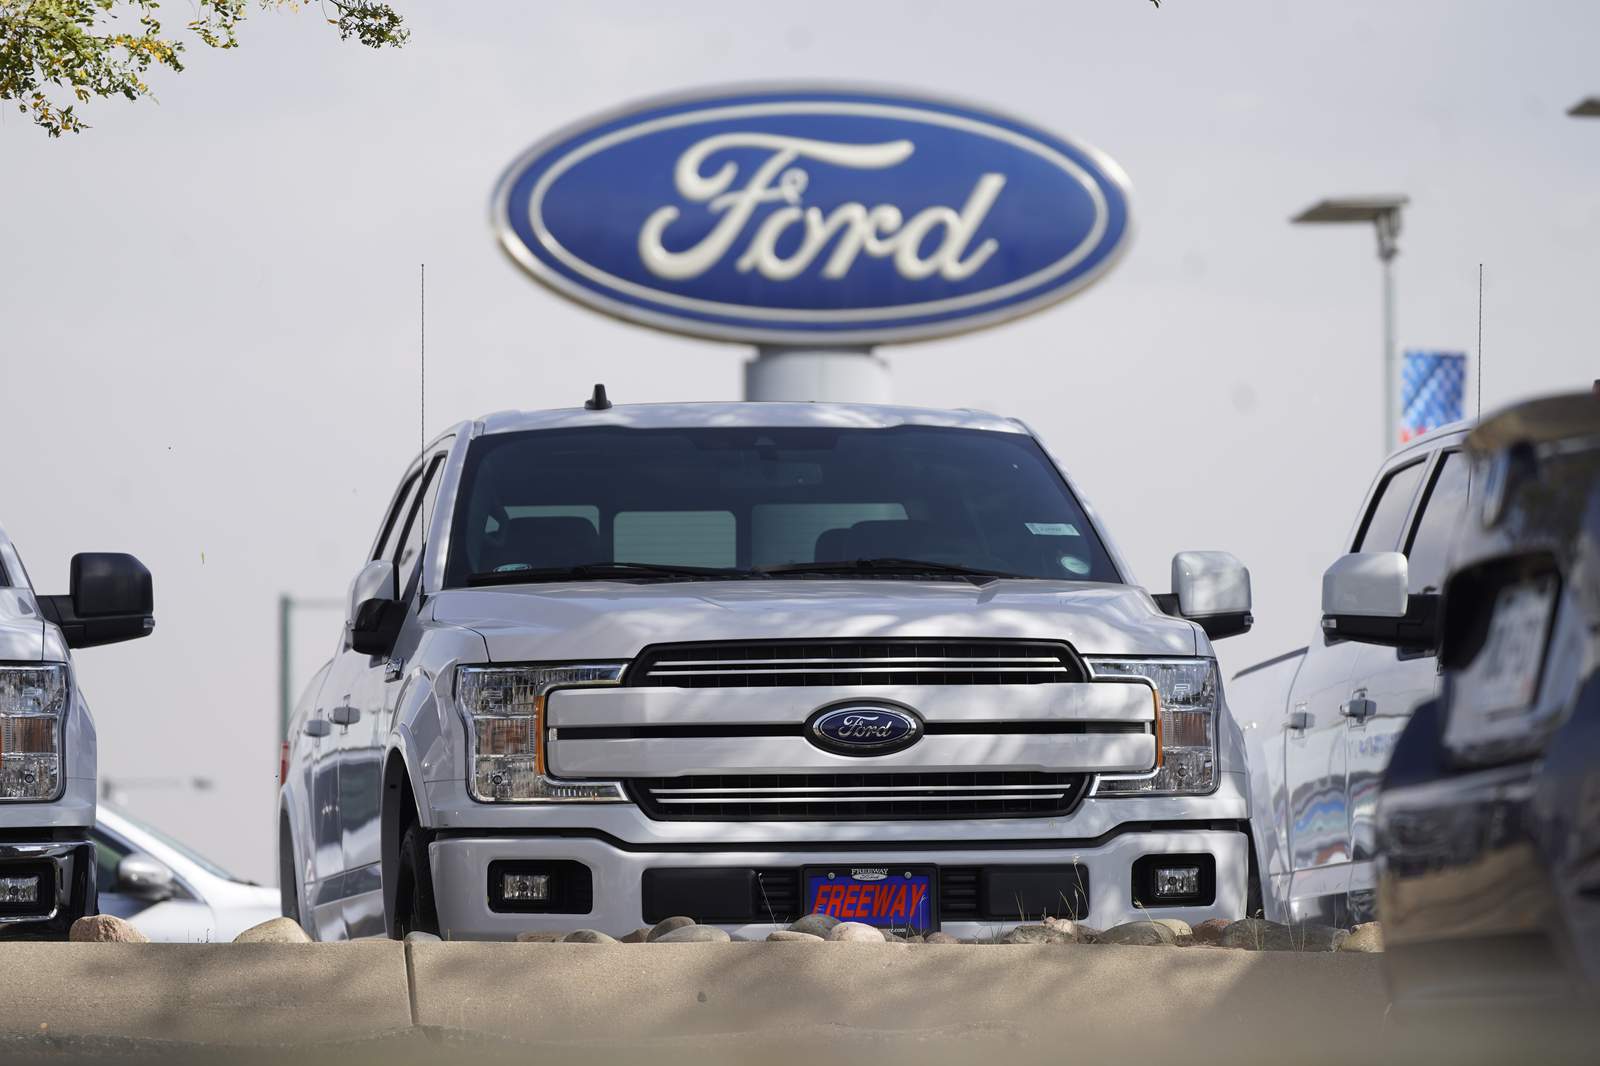 Ford loses $1.28B in 2020, raises electric vehicle spending